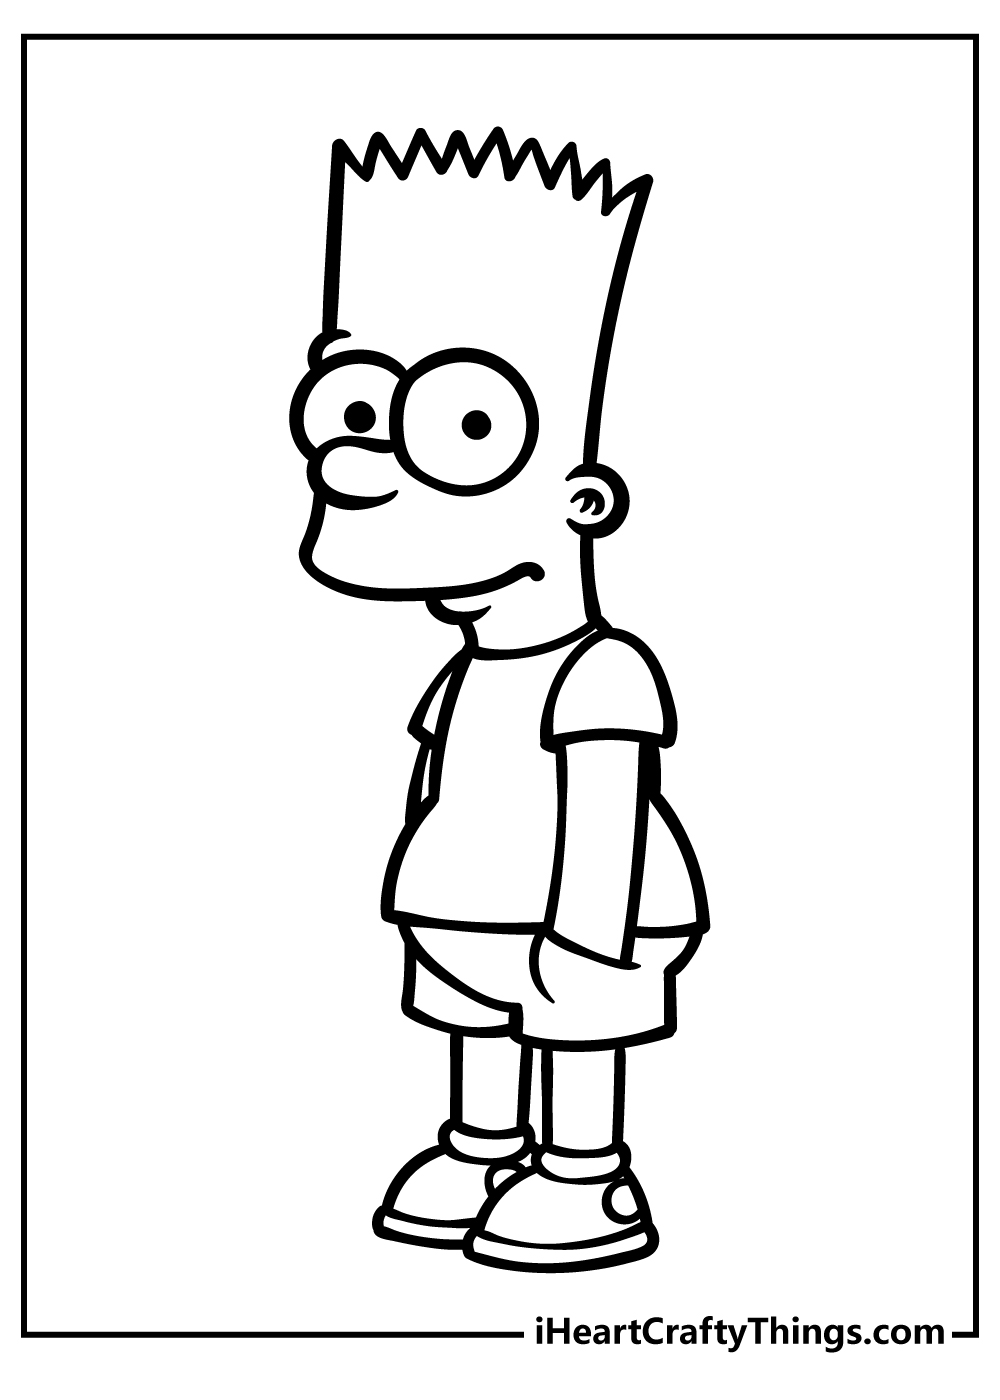 Simpsons Coloring Pages for kids free download